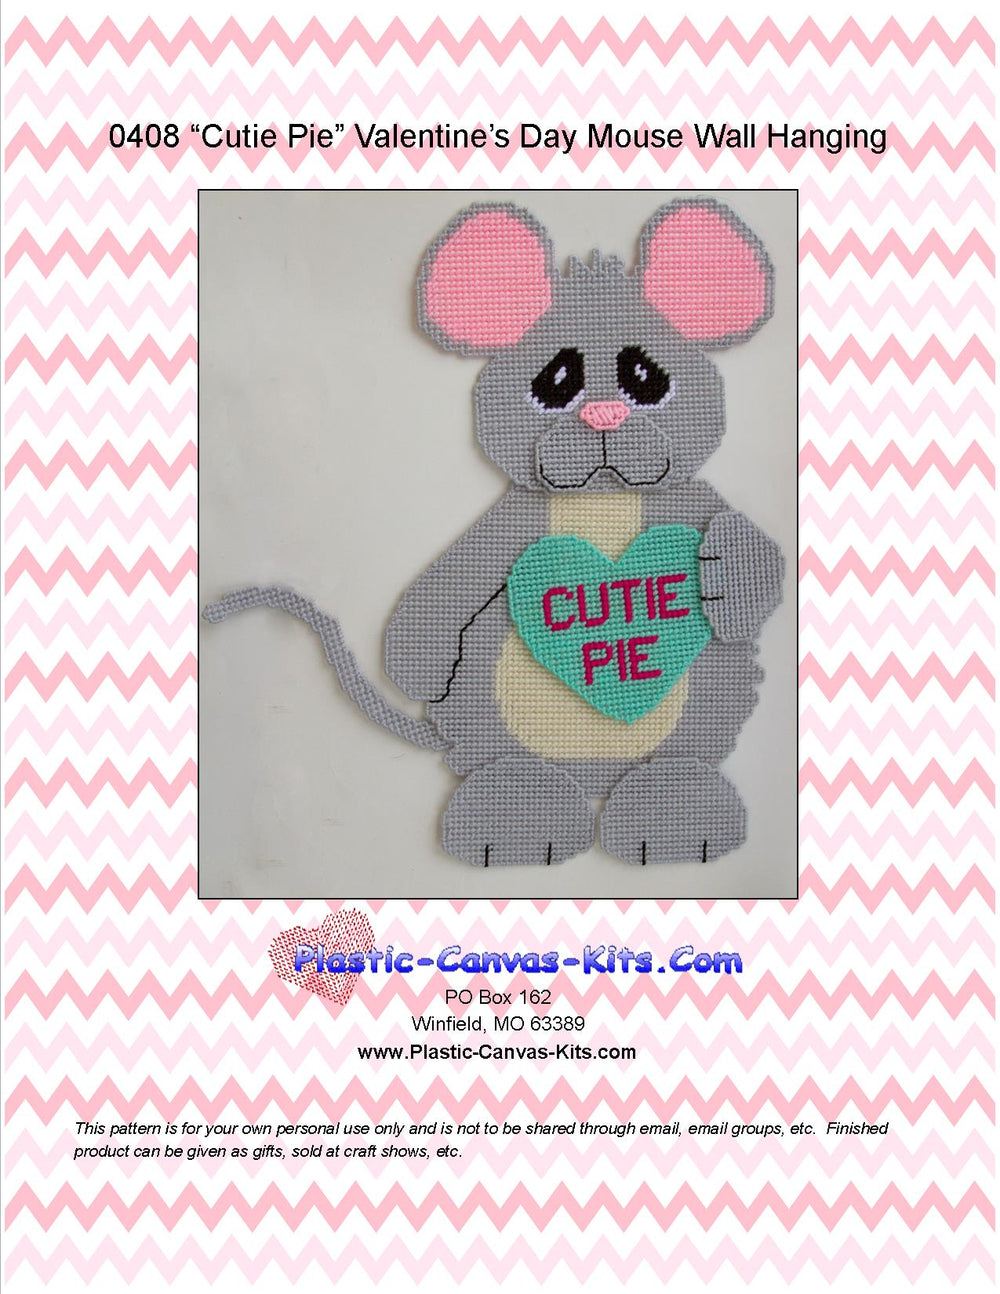 Cutie Pie Valentine's Day Mouse Wall Hanging